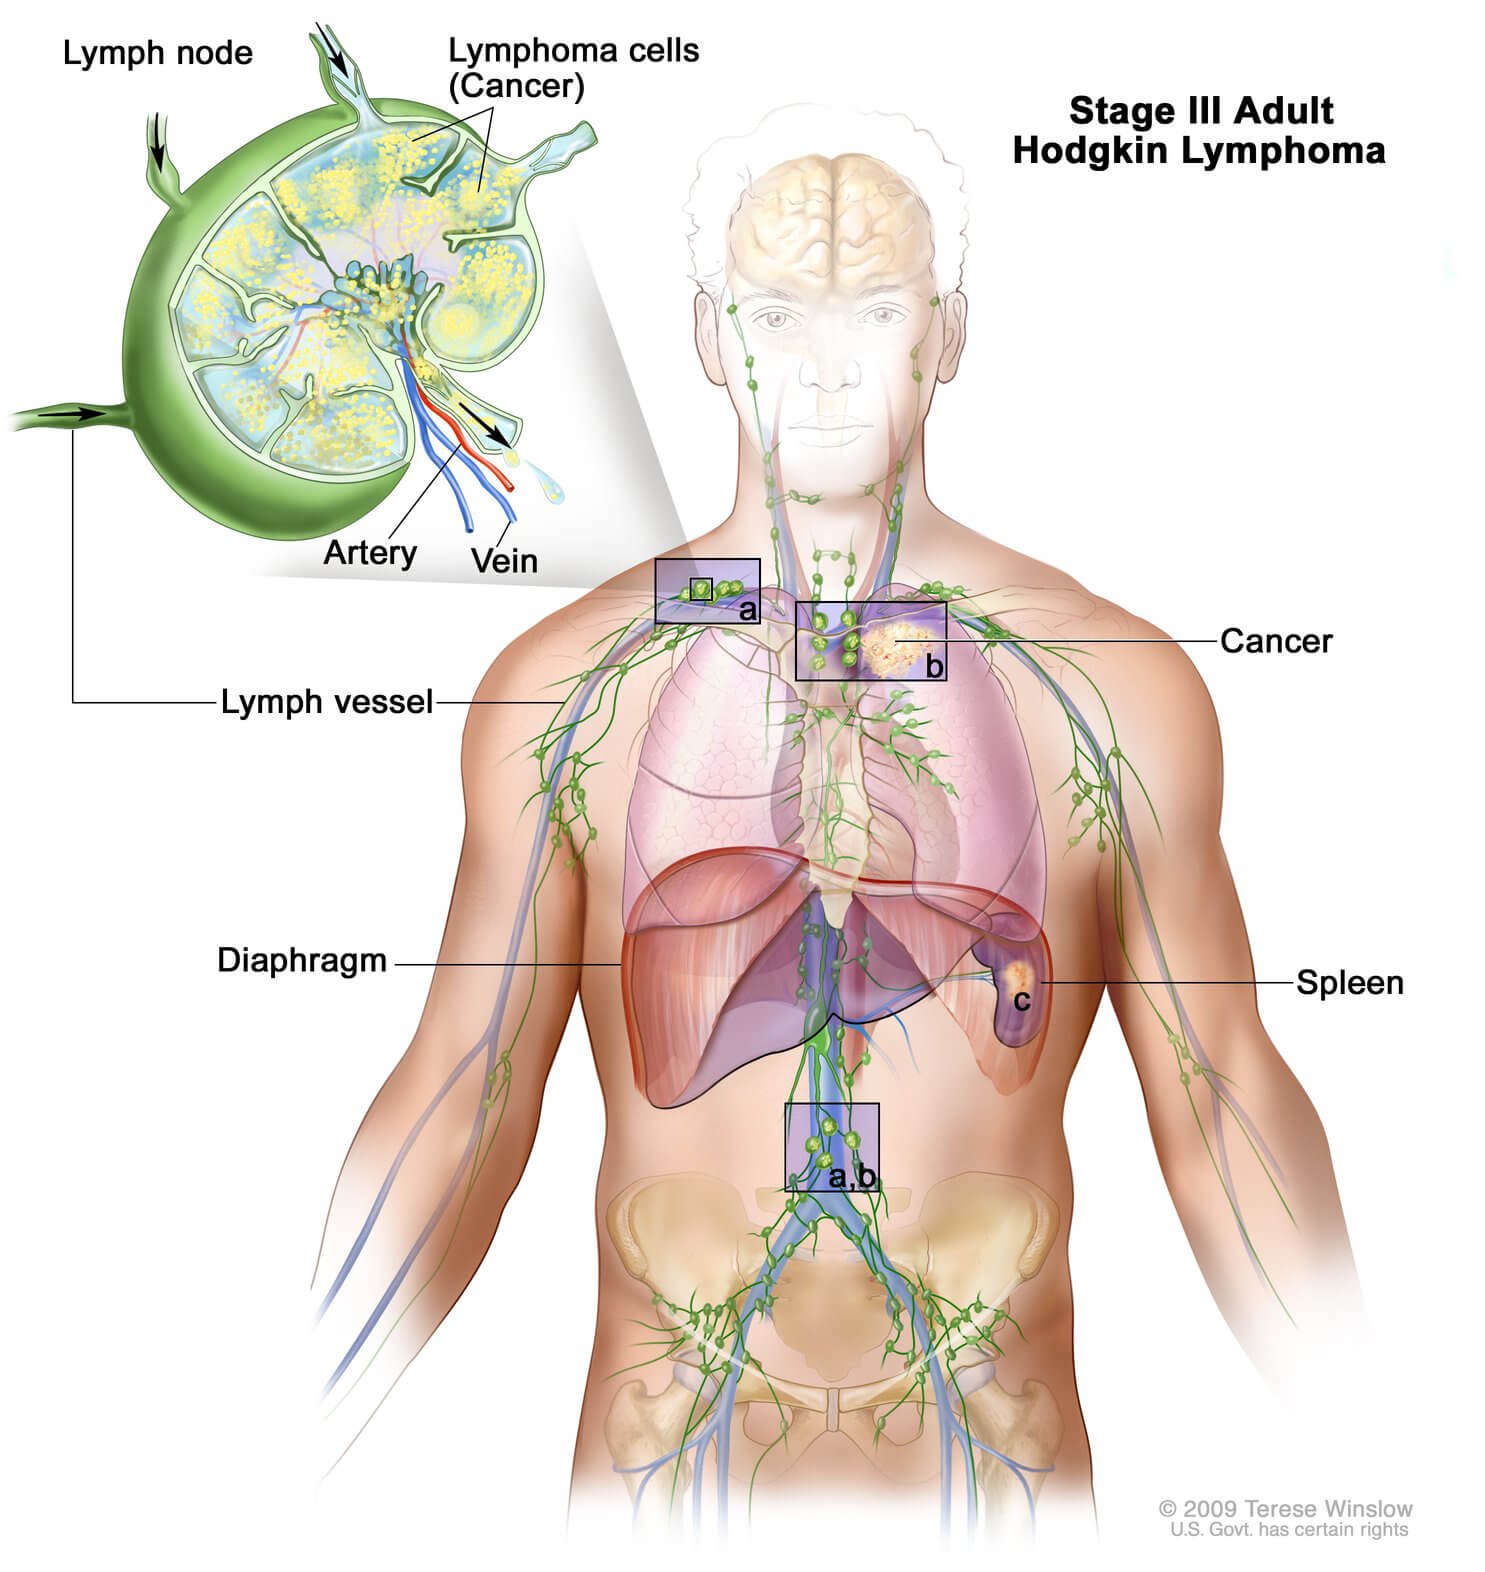 AIDS-Related Non-Hodgkin Lymphoma